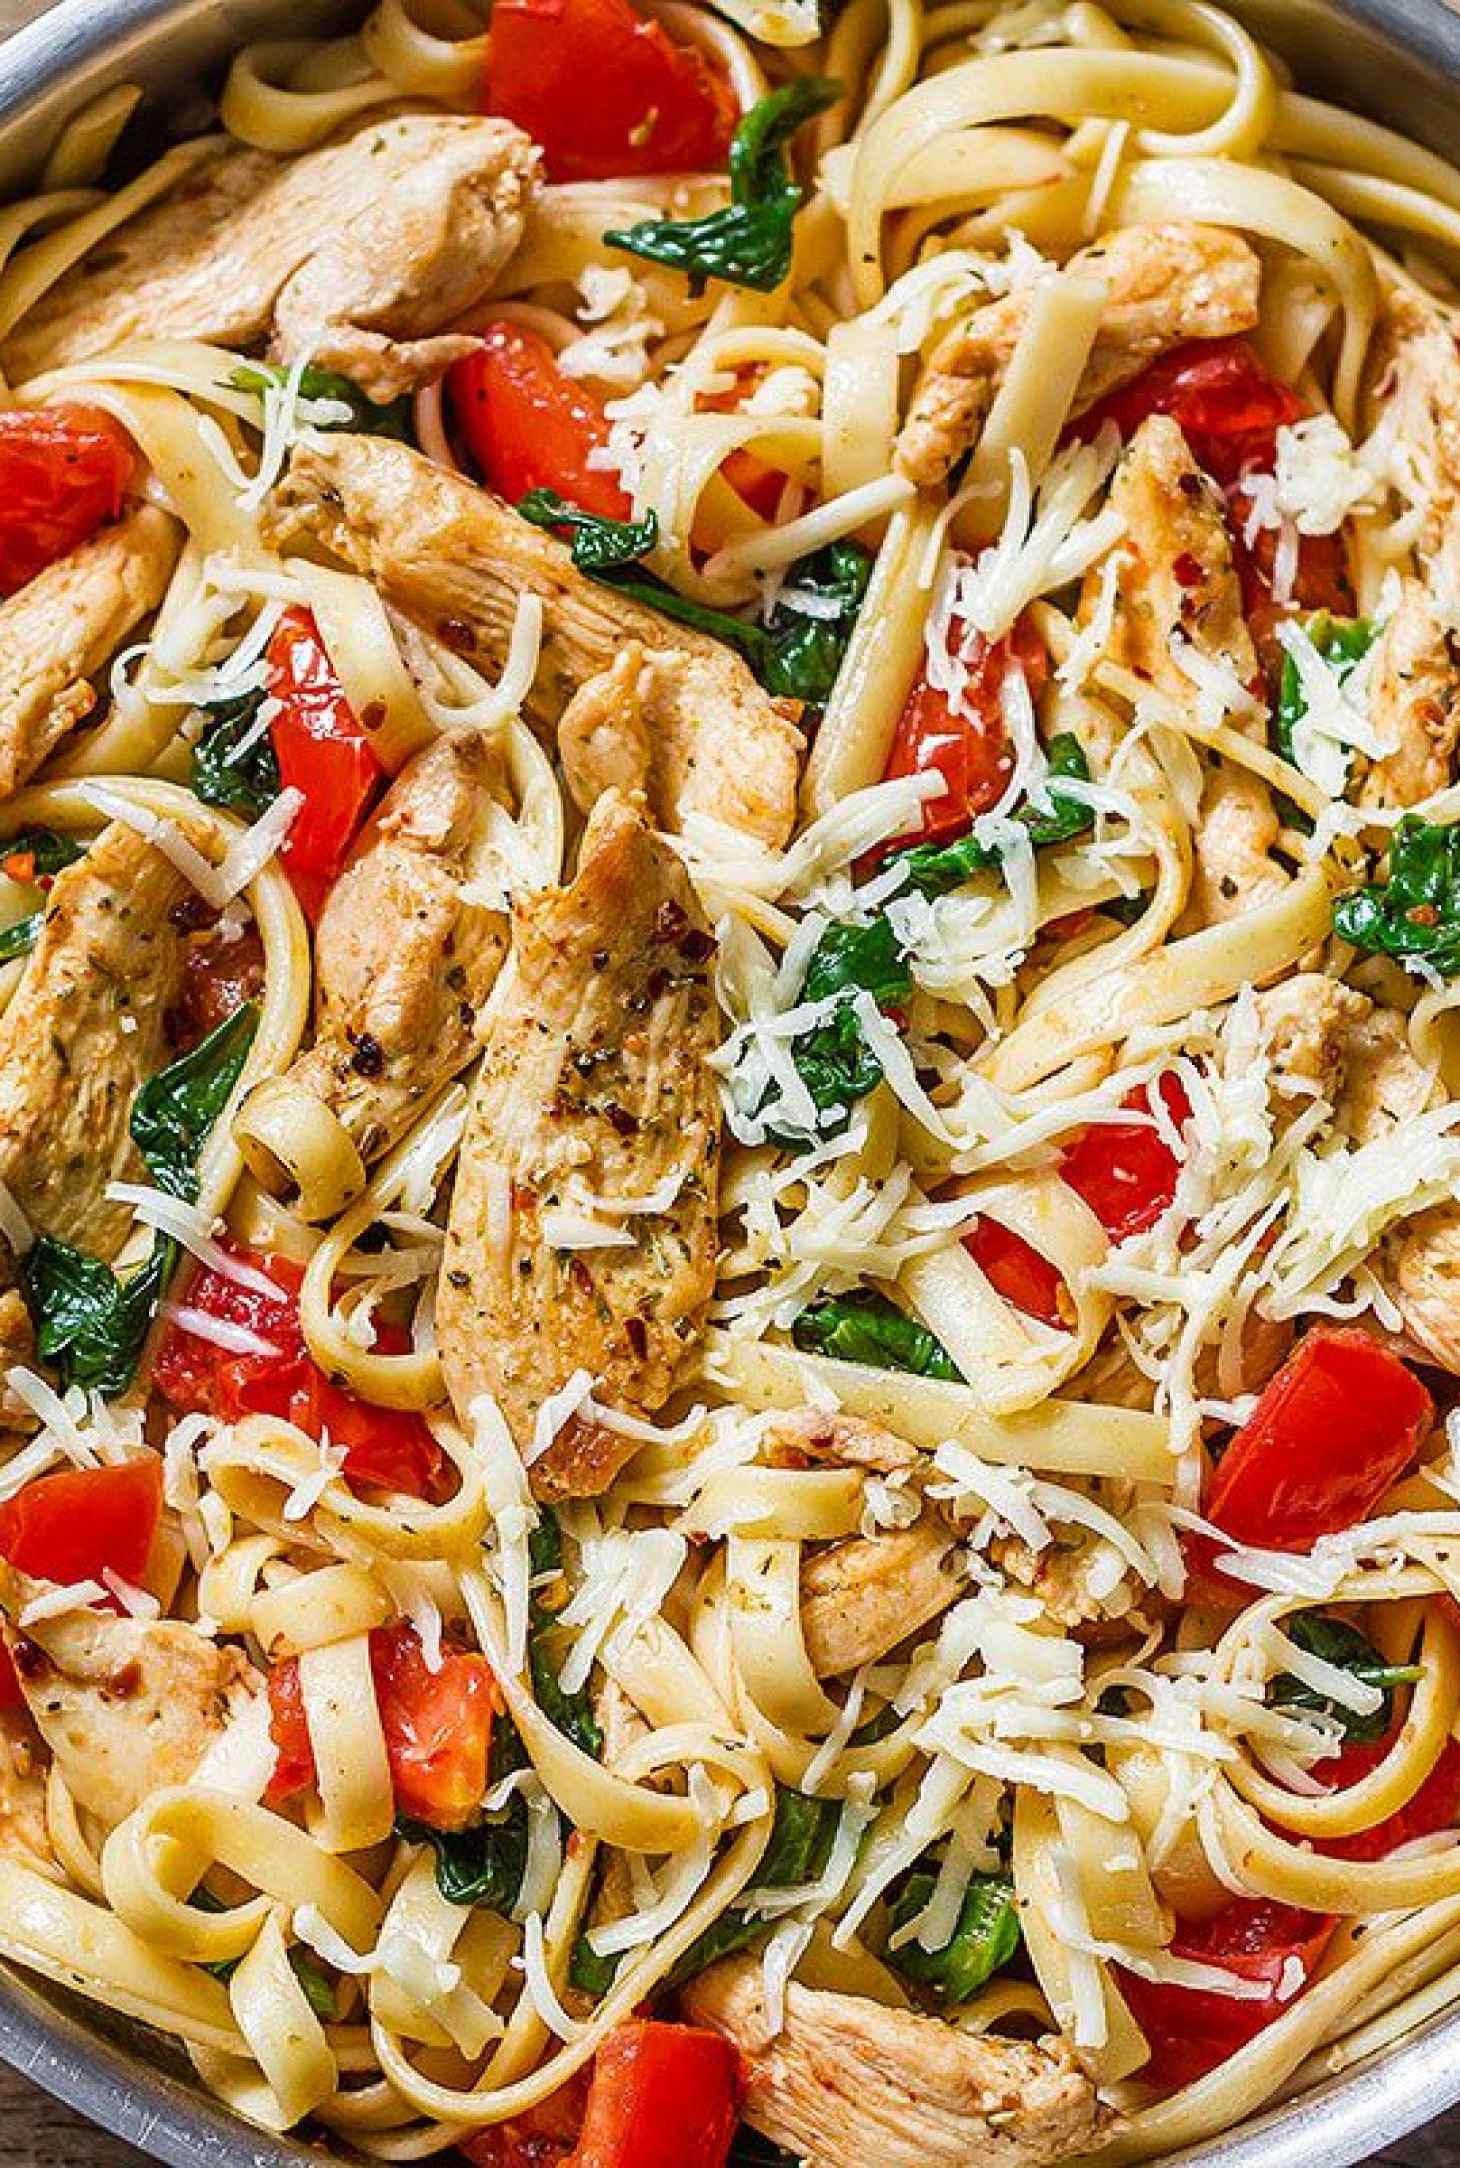 Chicken Breast Recipes: 40 Simple Meals for Dinner ...